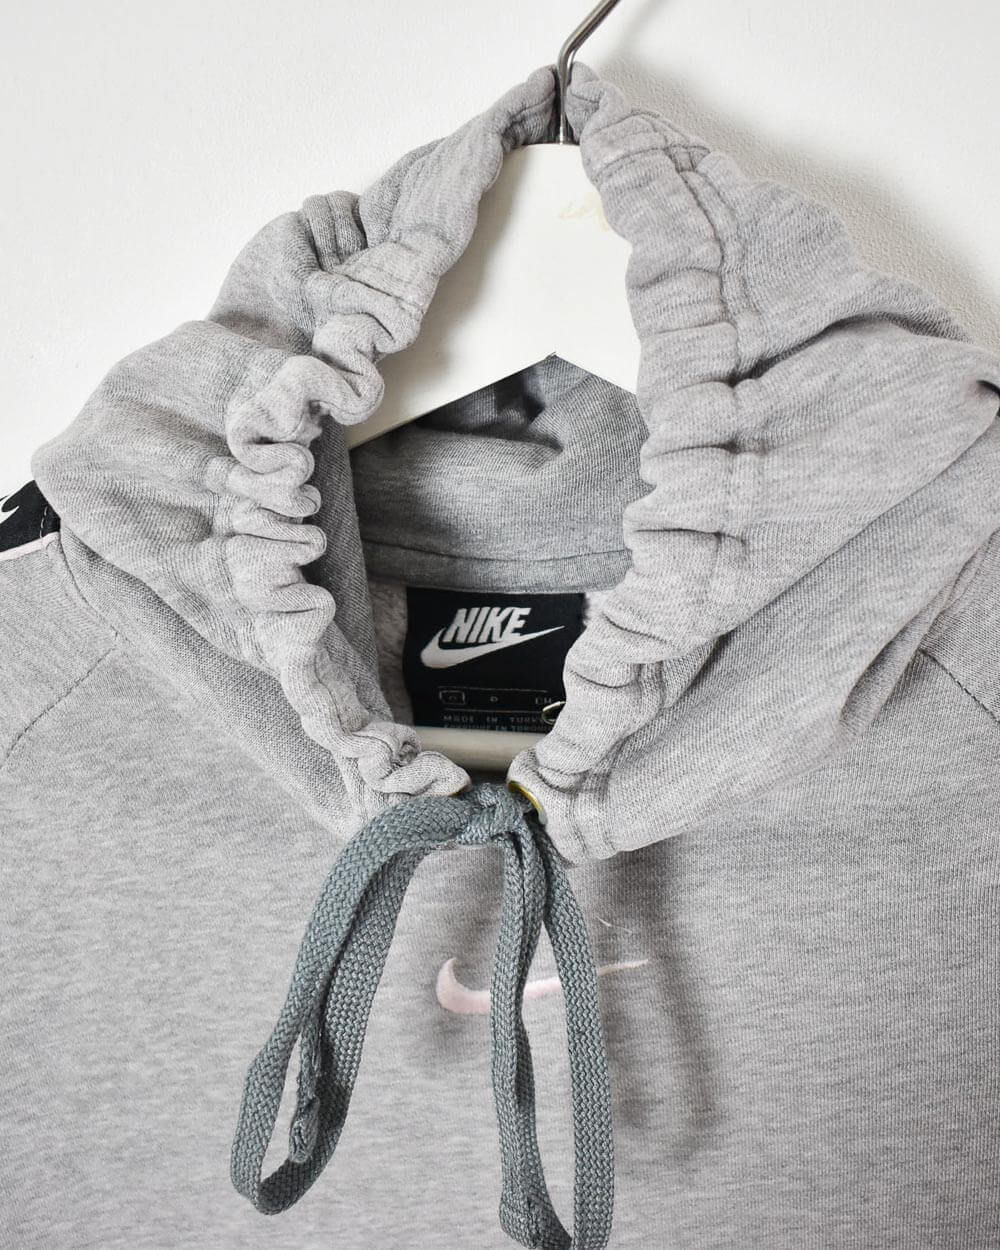 Nike Hoodie - Small - Domno Vintage 90s, 80s, 00s Retro and Vintage Clothing 